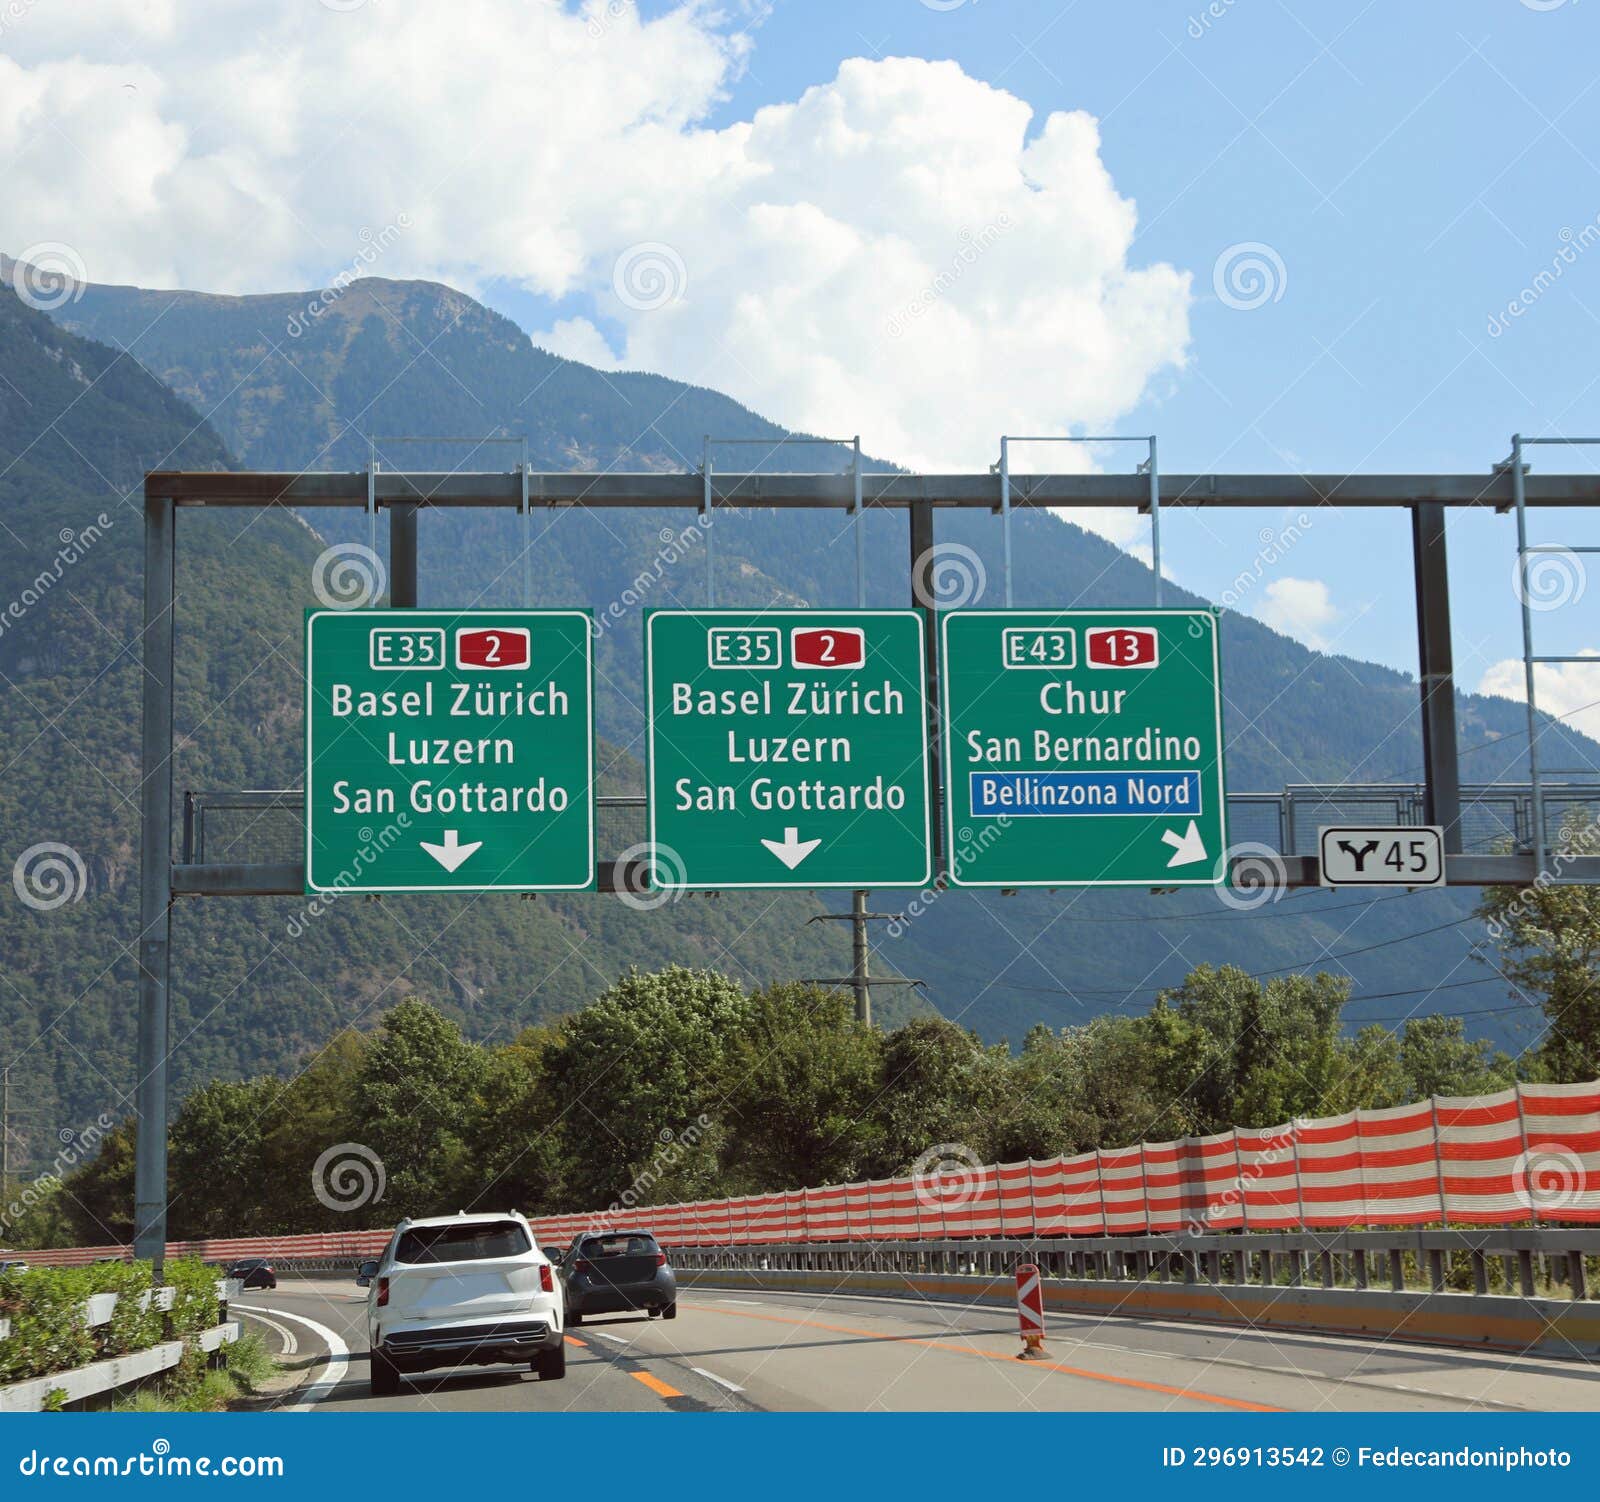 road signs on the motorway with directions to many locations in switzerland